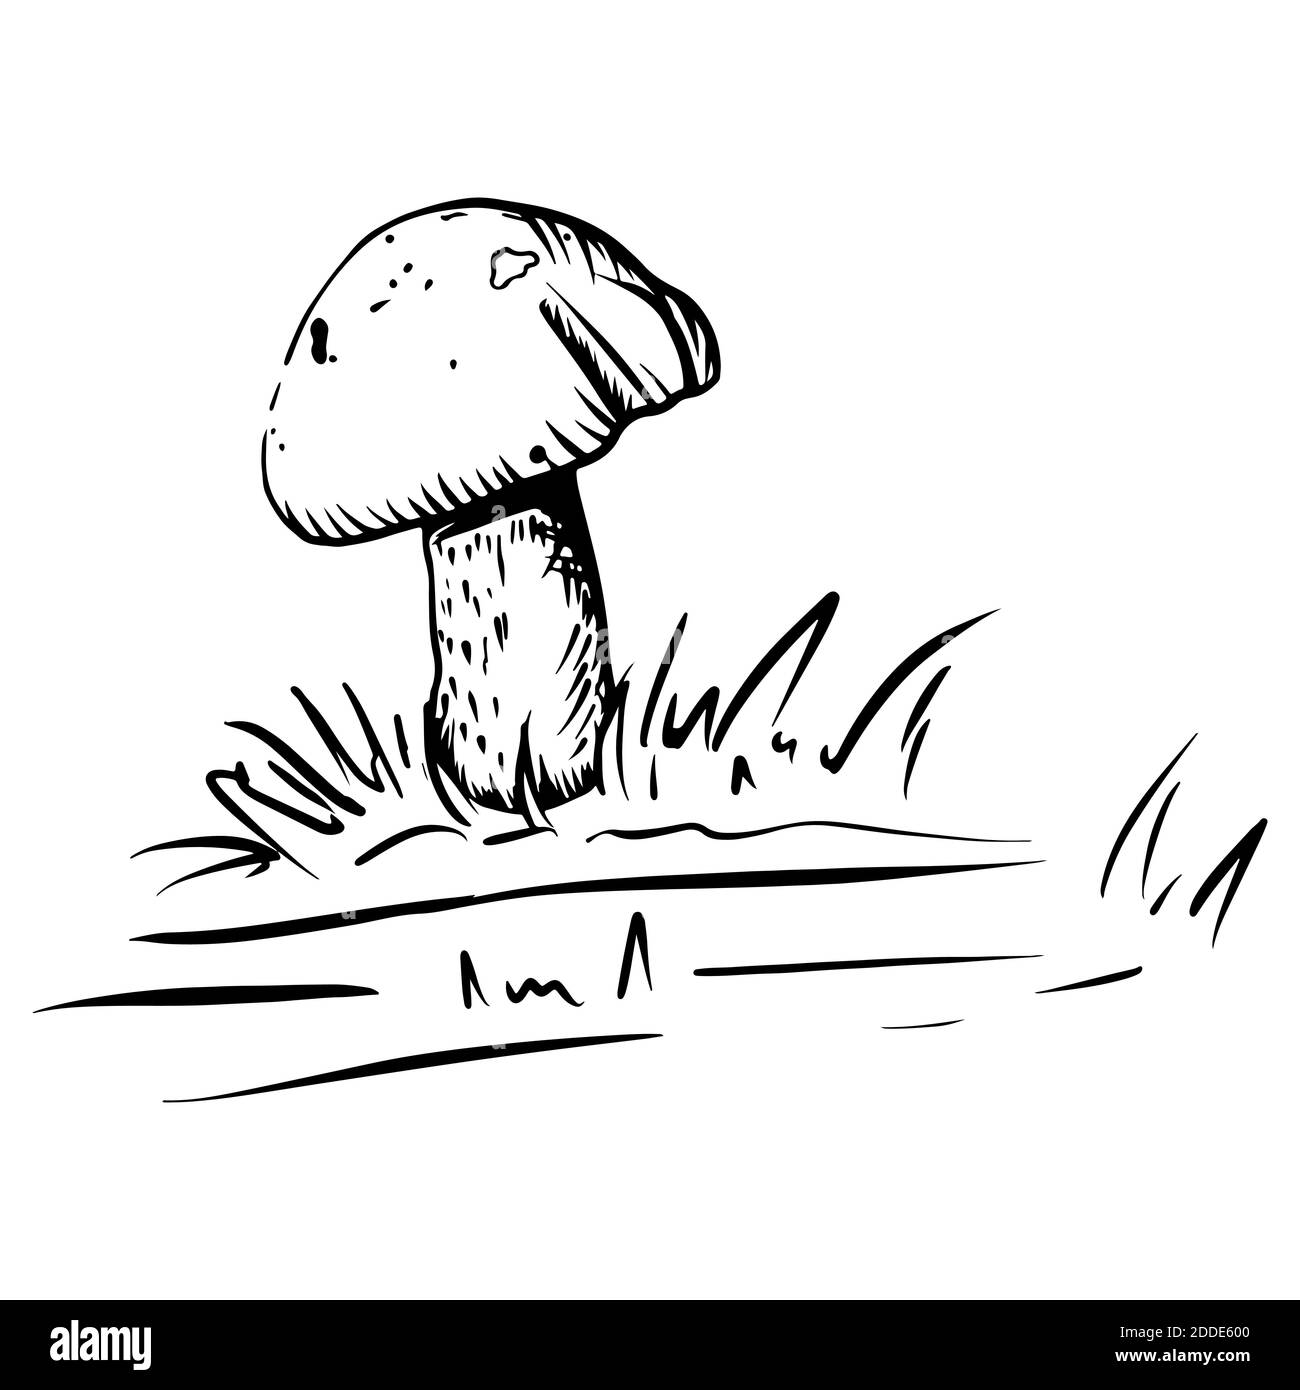 Forest mushroom in grass. Hand drawn line sketch illustration in engraved doodle style. Isolated vector. Autumn vegetarian food. Brown cap or orange cup boletus. Botanic drawing with strokes. Stock Vector